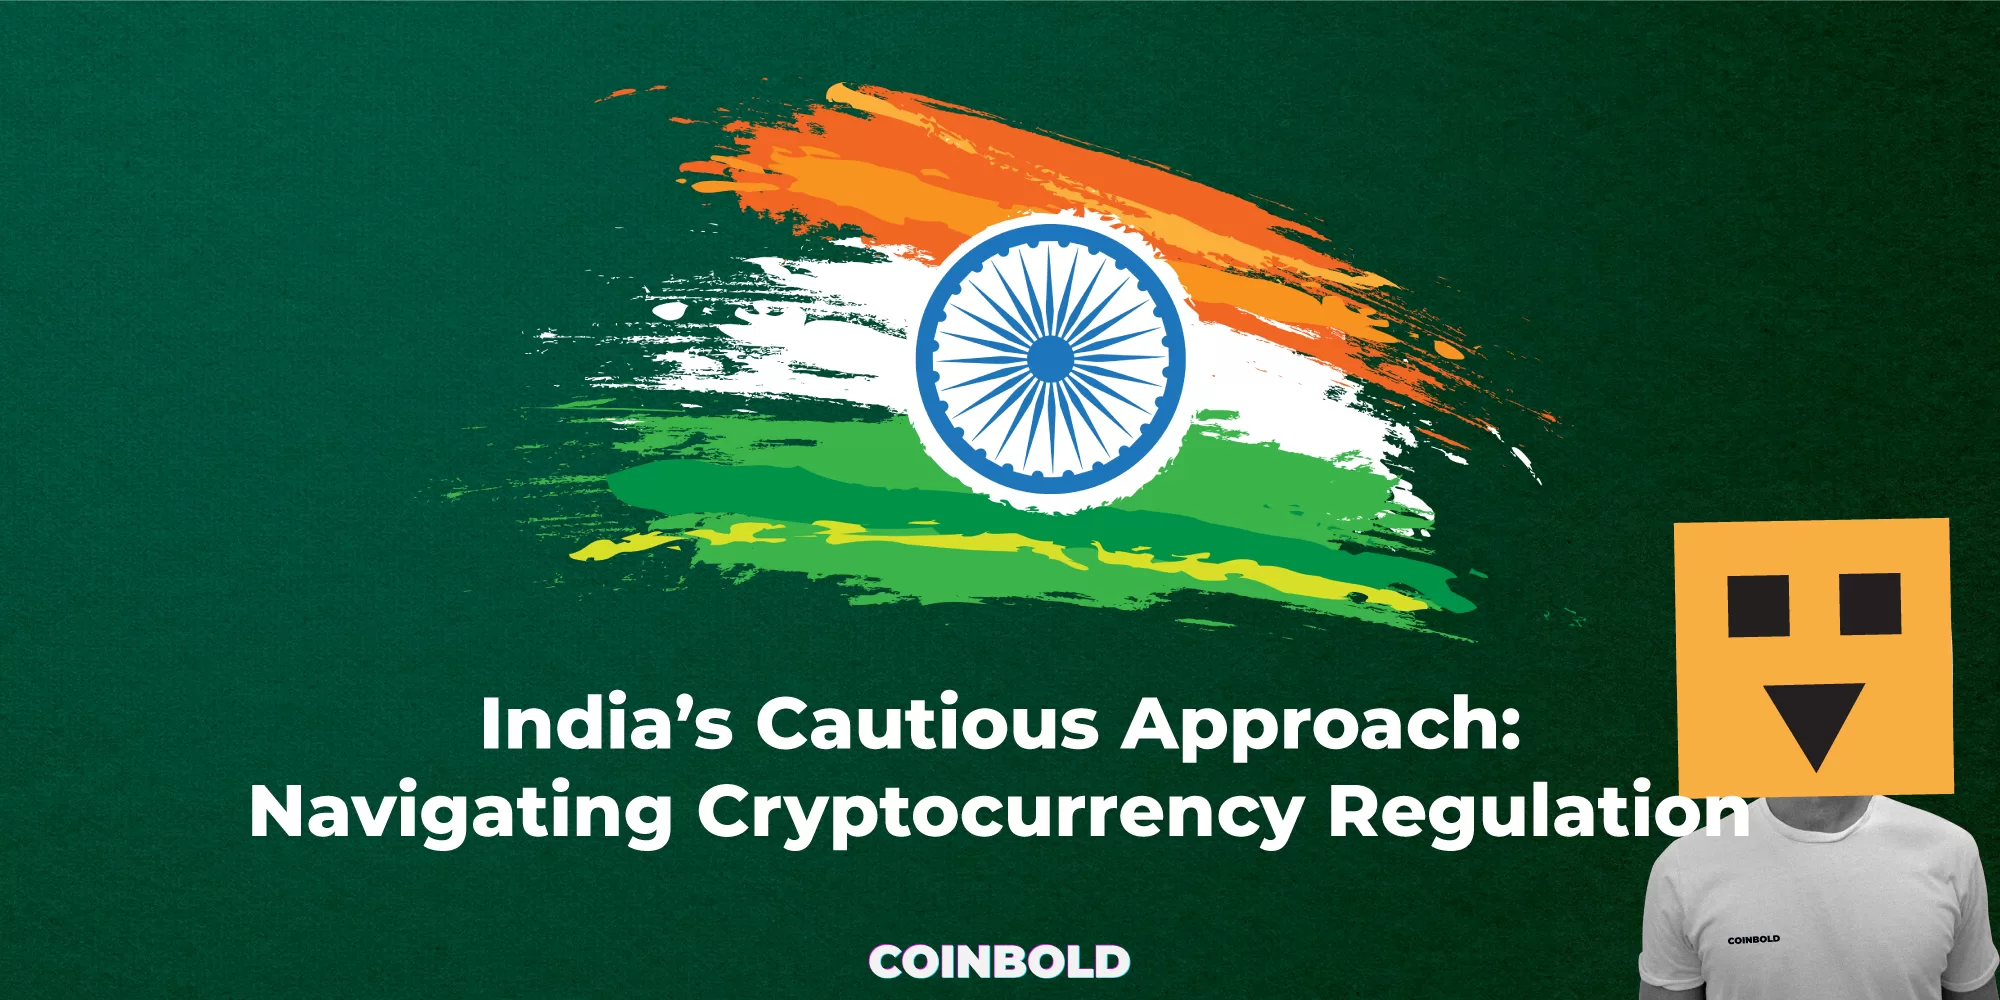 India’s Cautious Approach Navigating Cryptocurrency Regulation